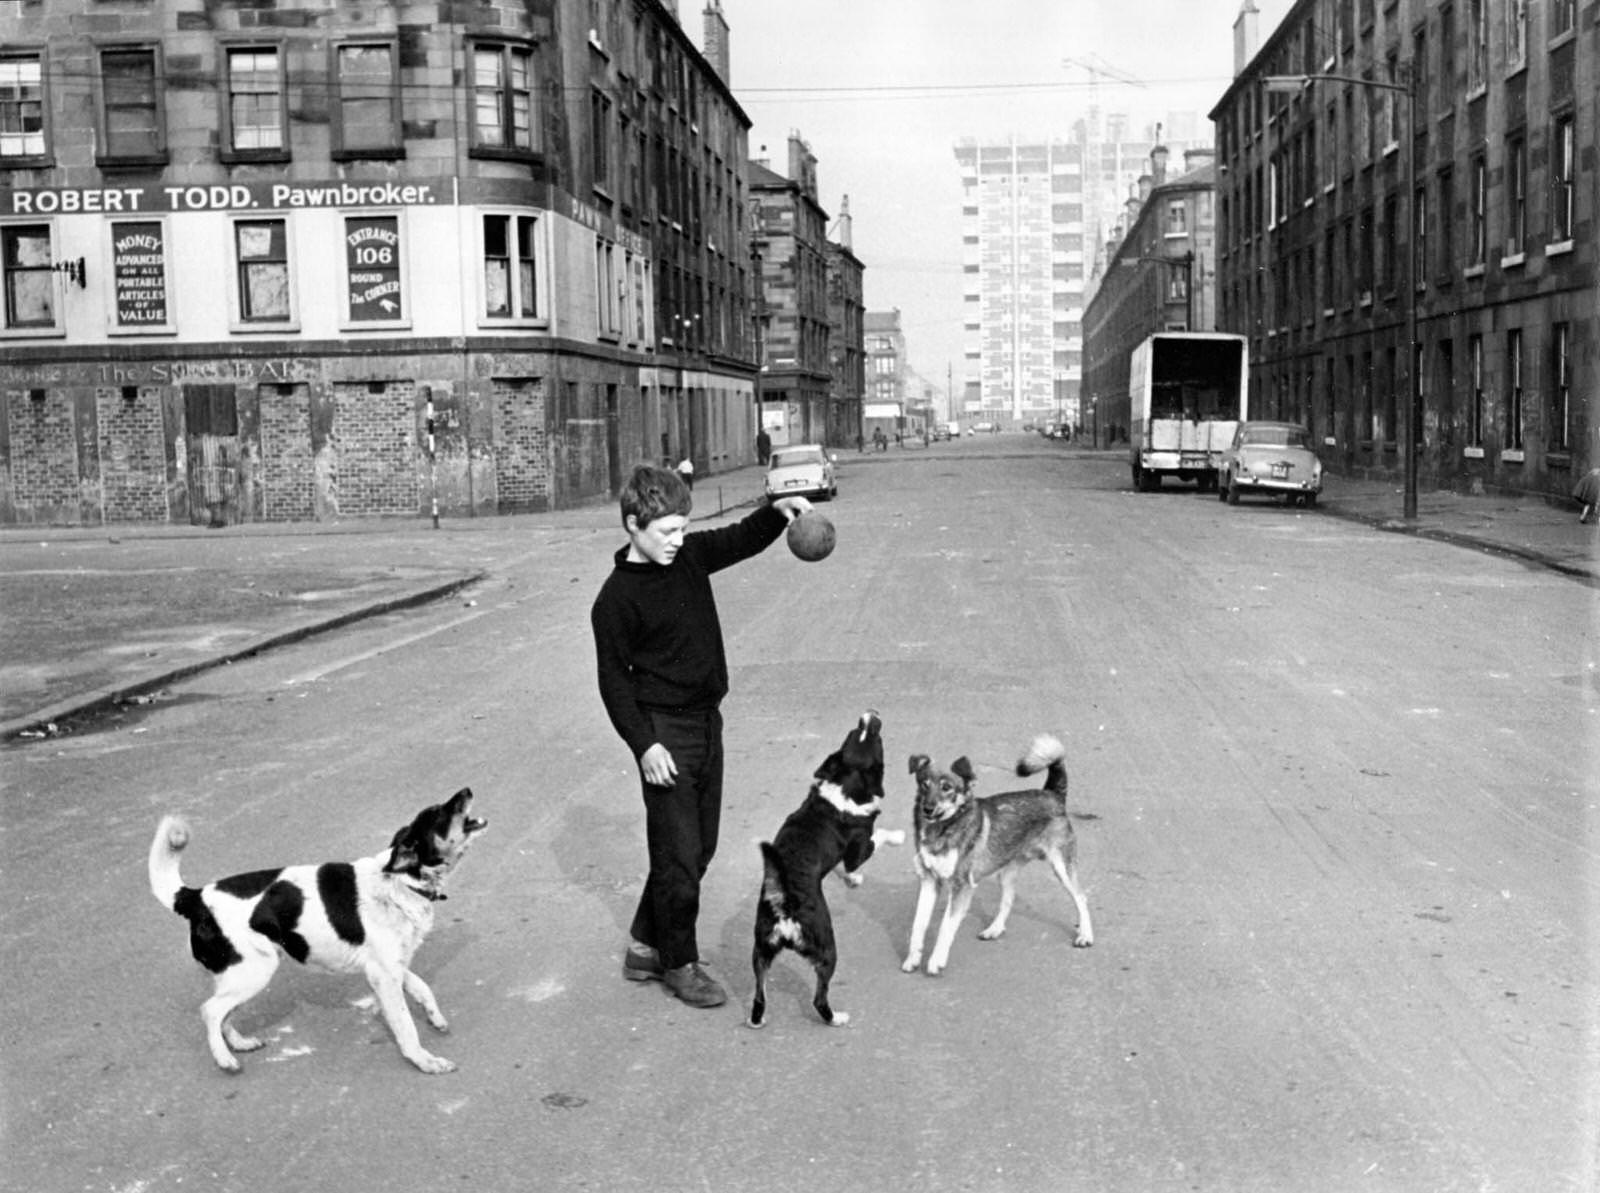 A boy playing with dogs in a road of tenement housing in the Gorbals area of Glasgow, 1960